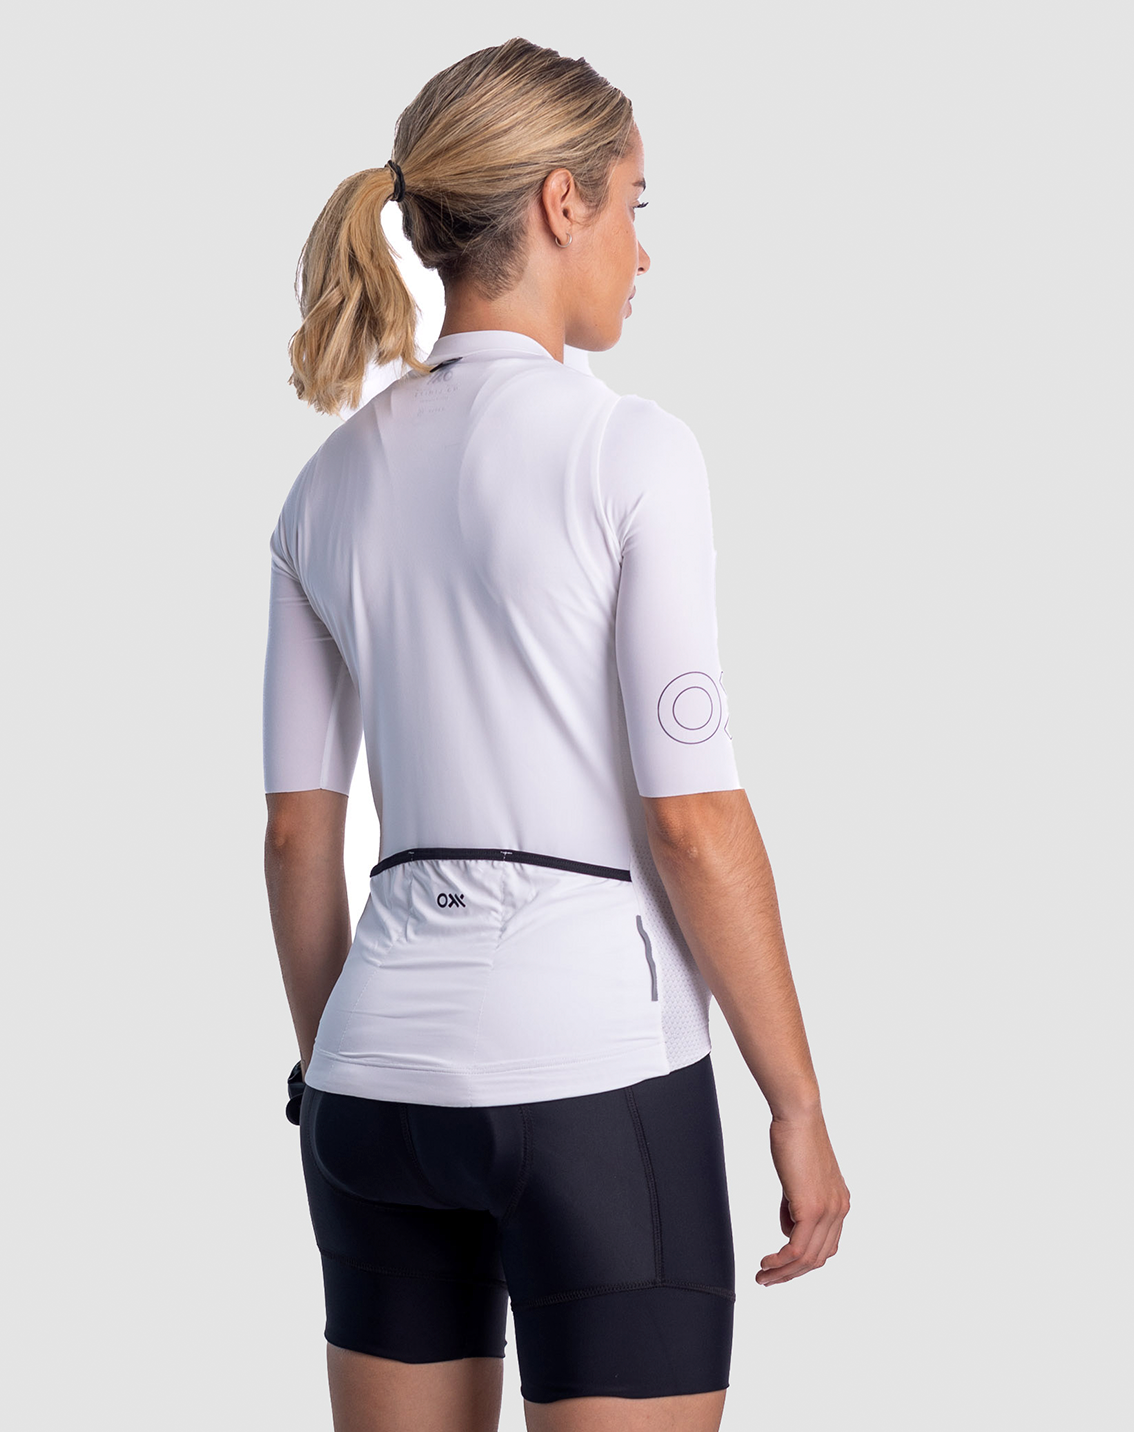 JERSEY ALPES TOTAL WHITE SLIM FIT MUJER